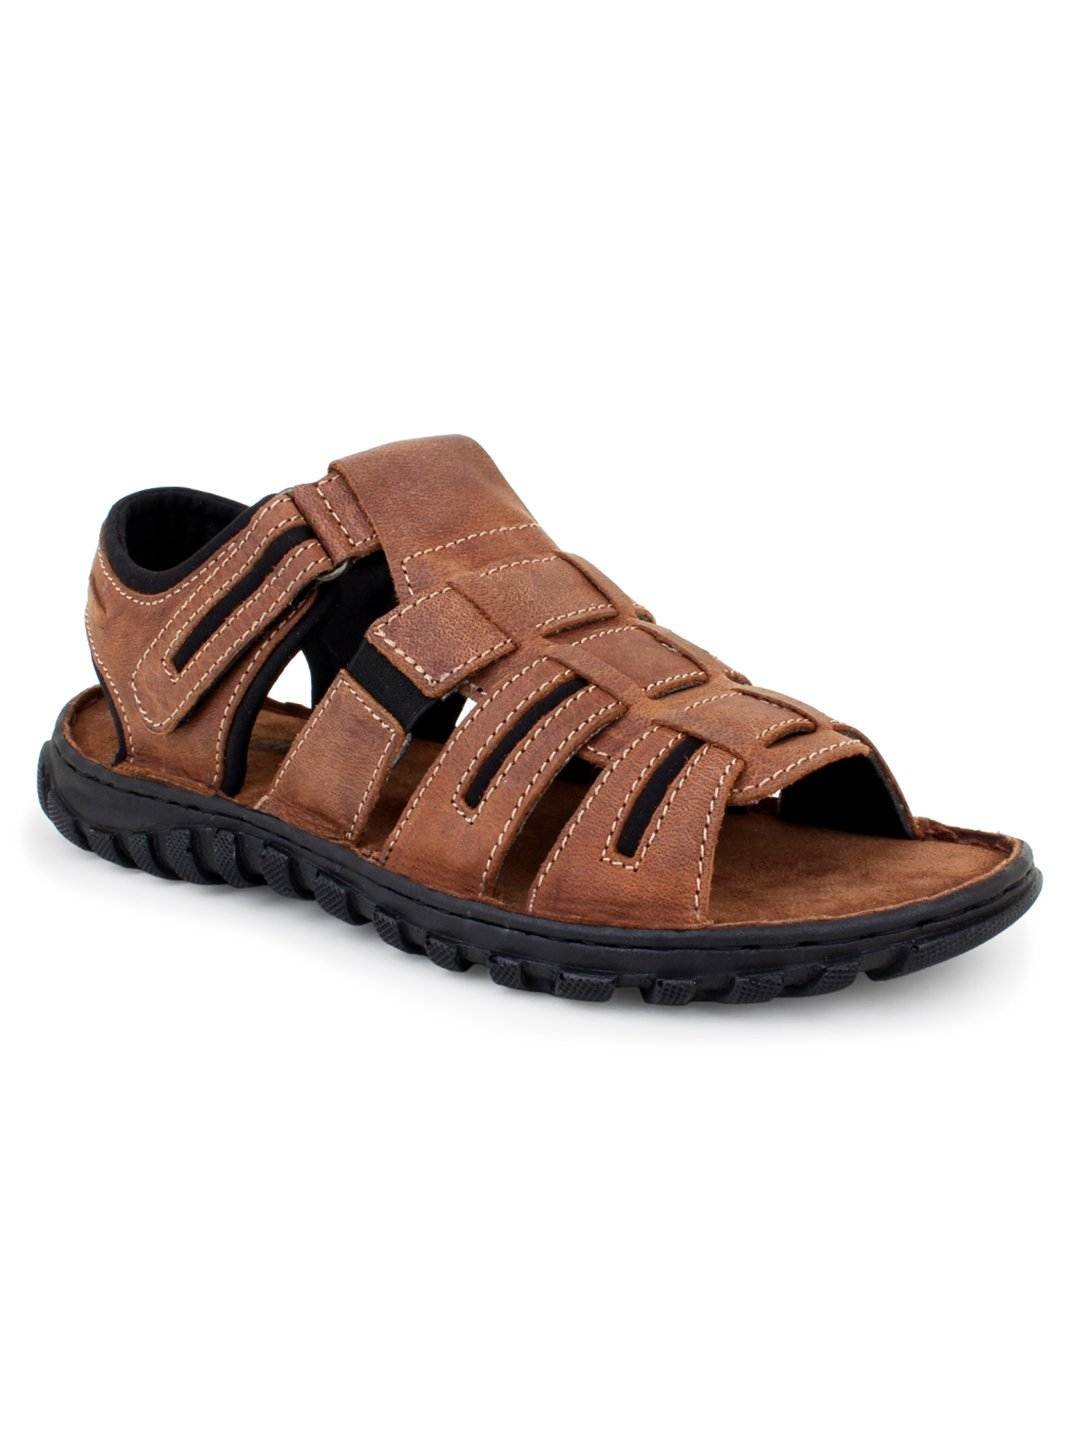 Buy ID Black Mens Leather Sandals | Shoppers Stop-anthinhphatland.vn